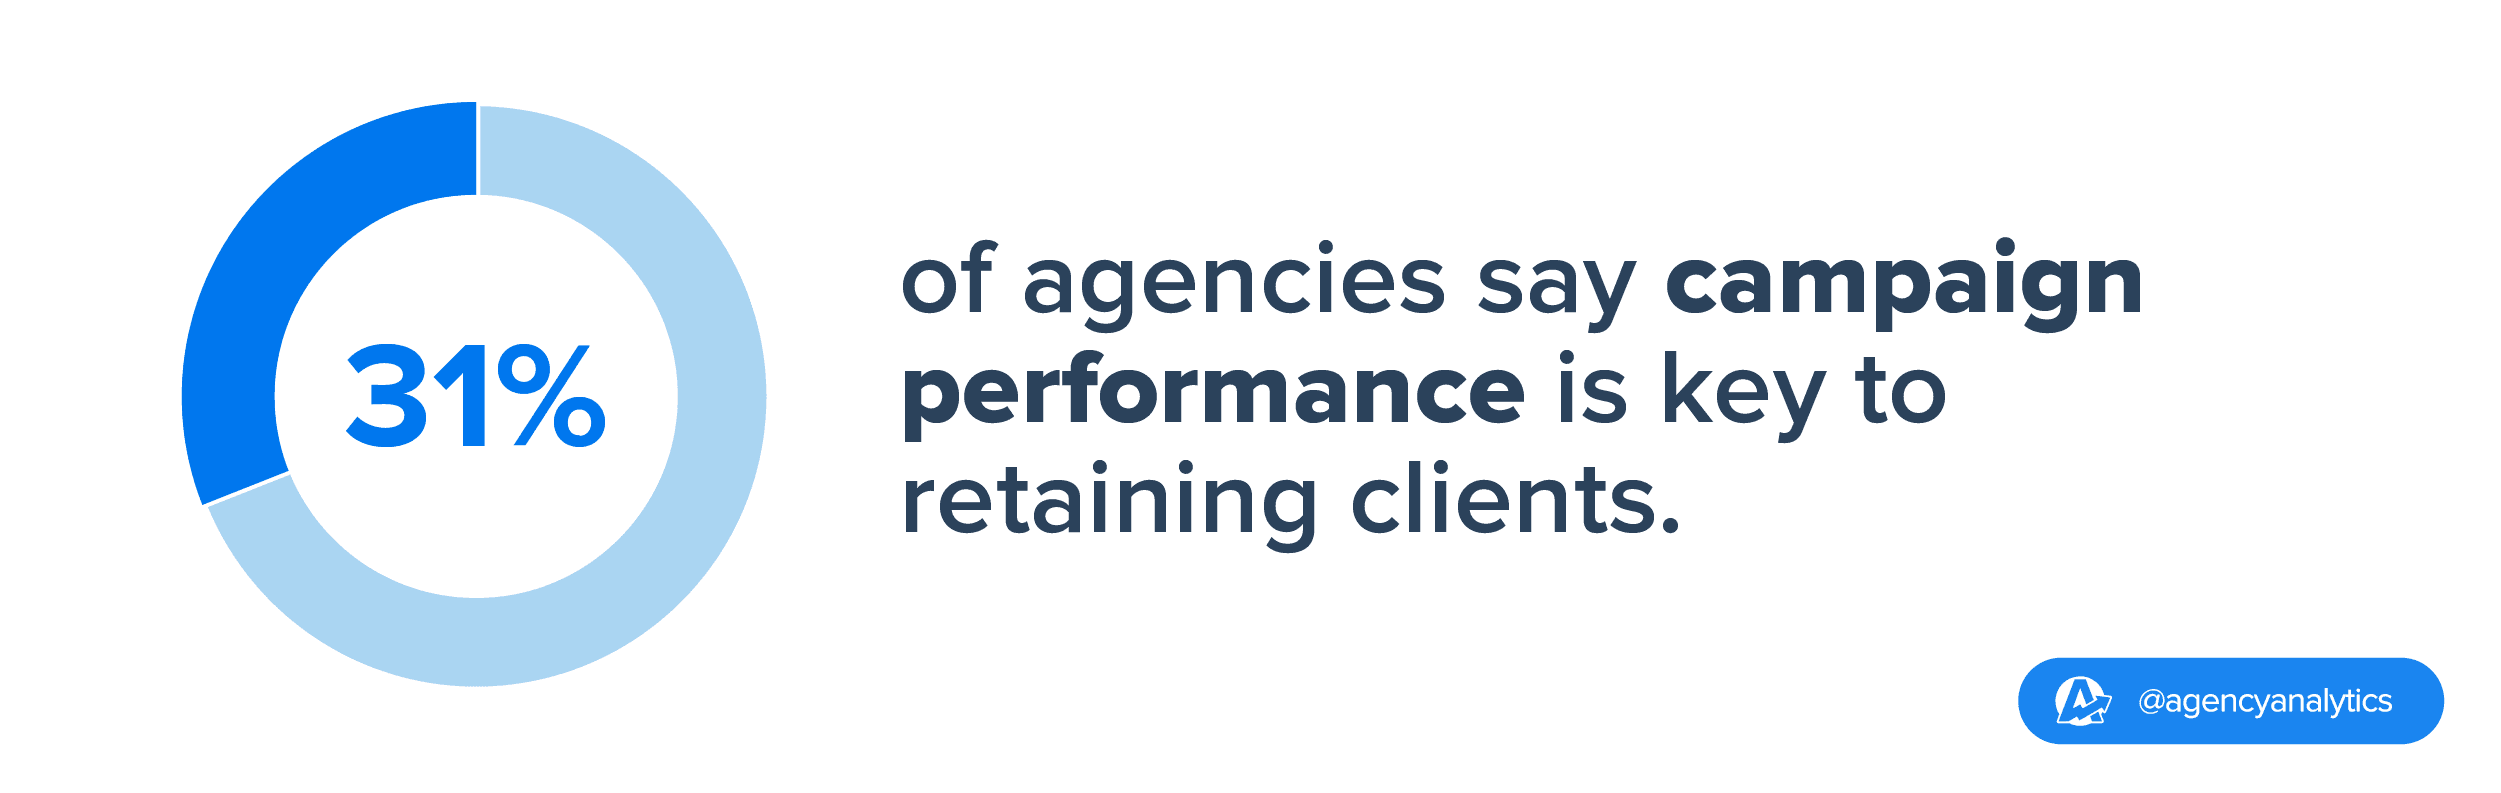 The survey results show that 31% of agencies attribute campaign performance to client retention